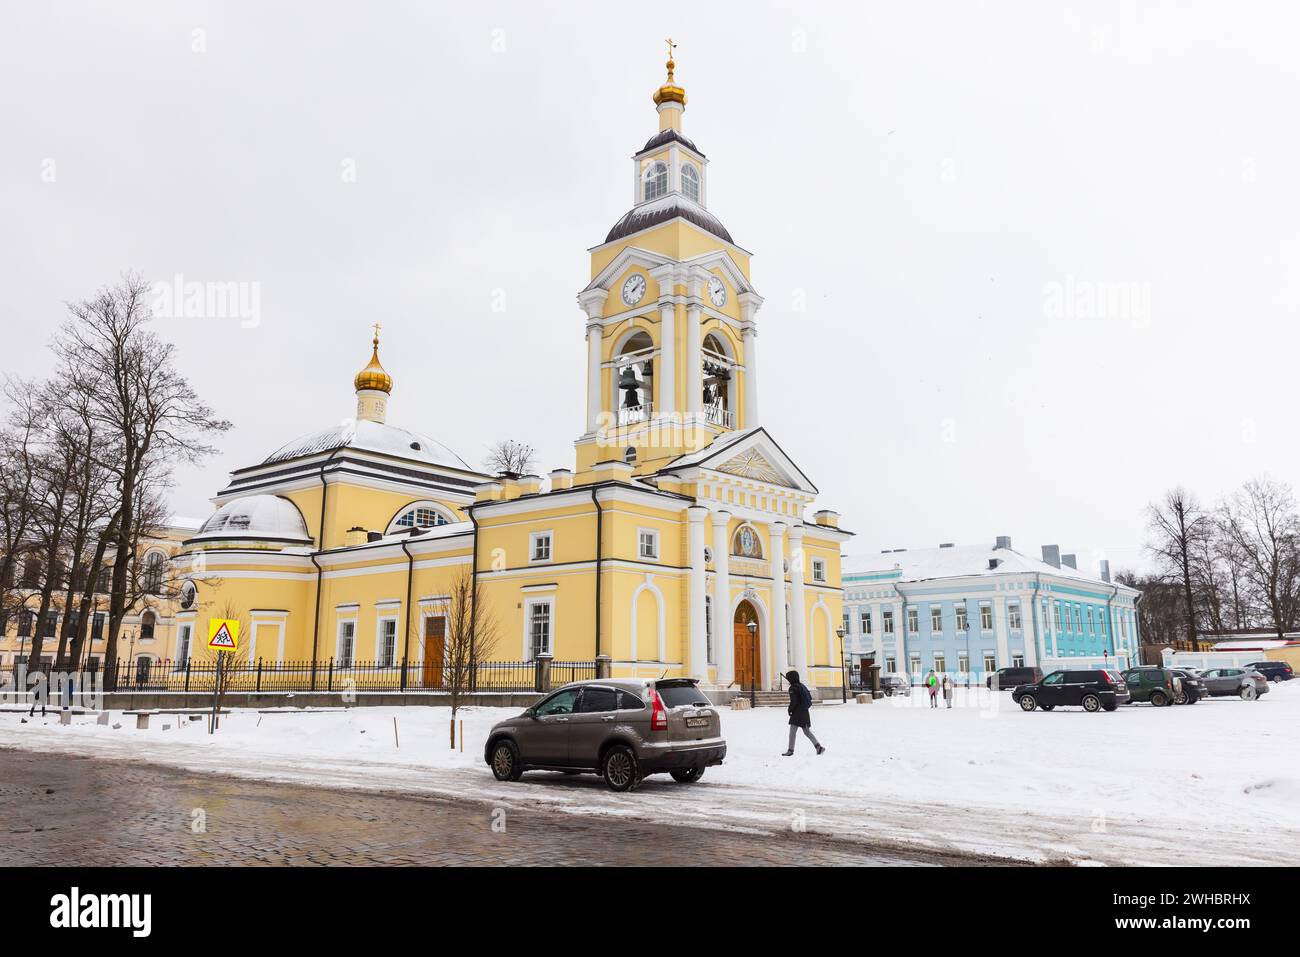 Vyborg, Russia - February 18, 2023: Cathedral of the Transfiguration of the Savior is the cathedral of the Vyborg diocese of the Russian Orthodox Chur Stock Photo